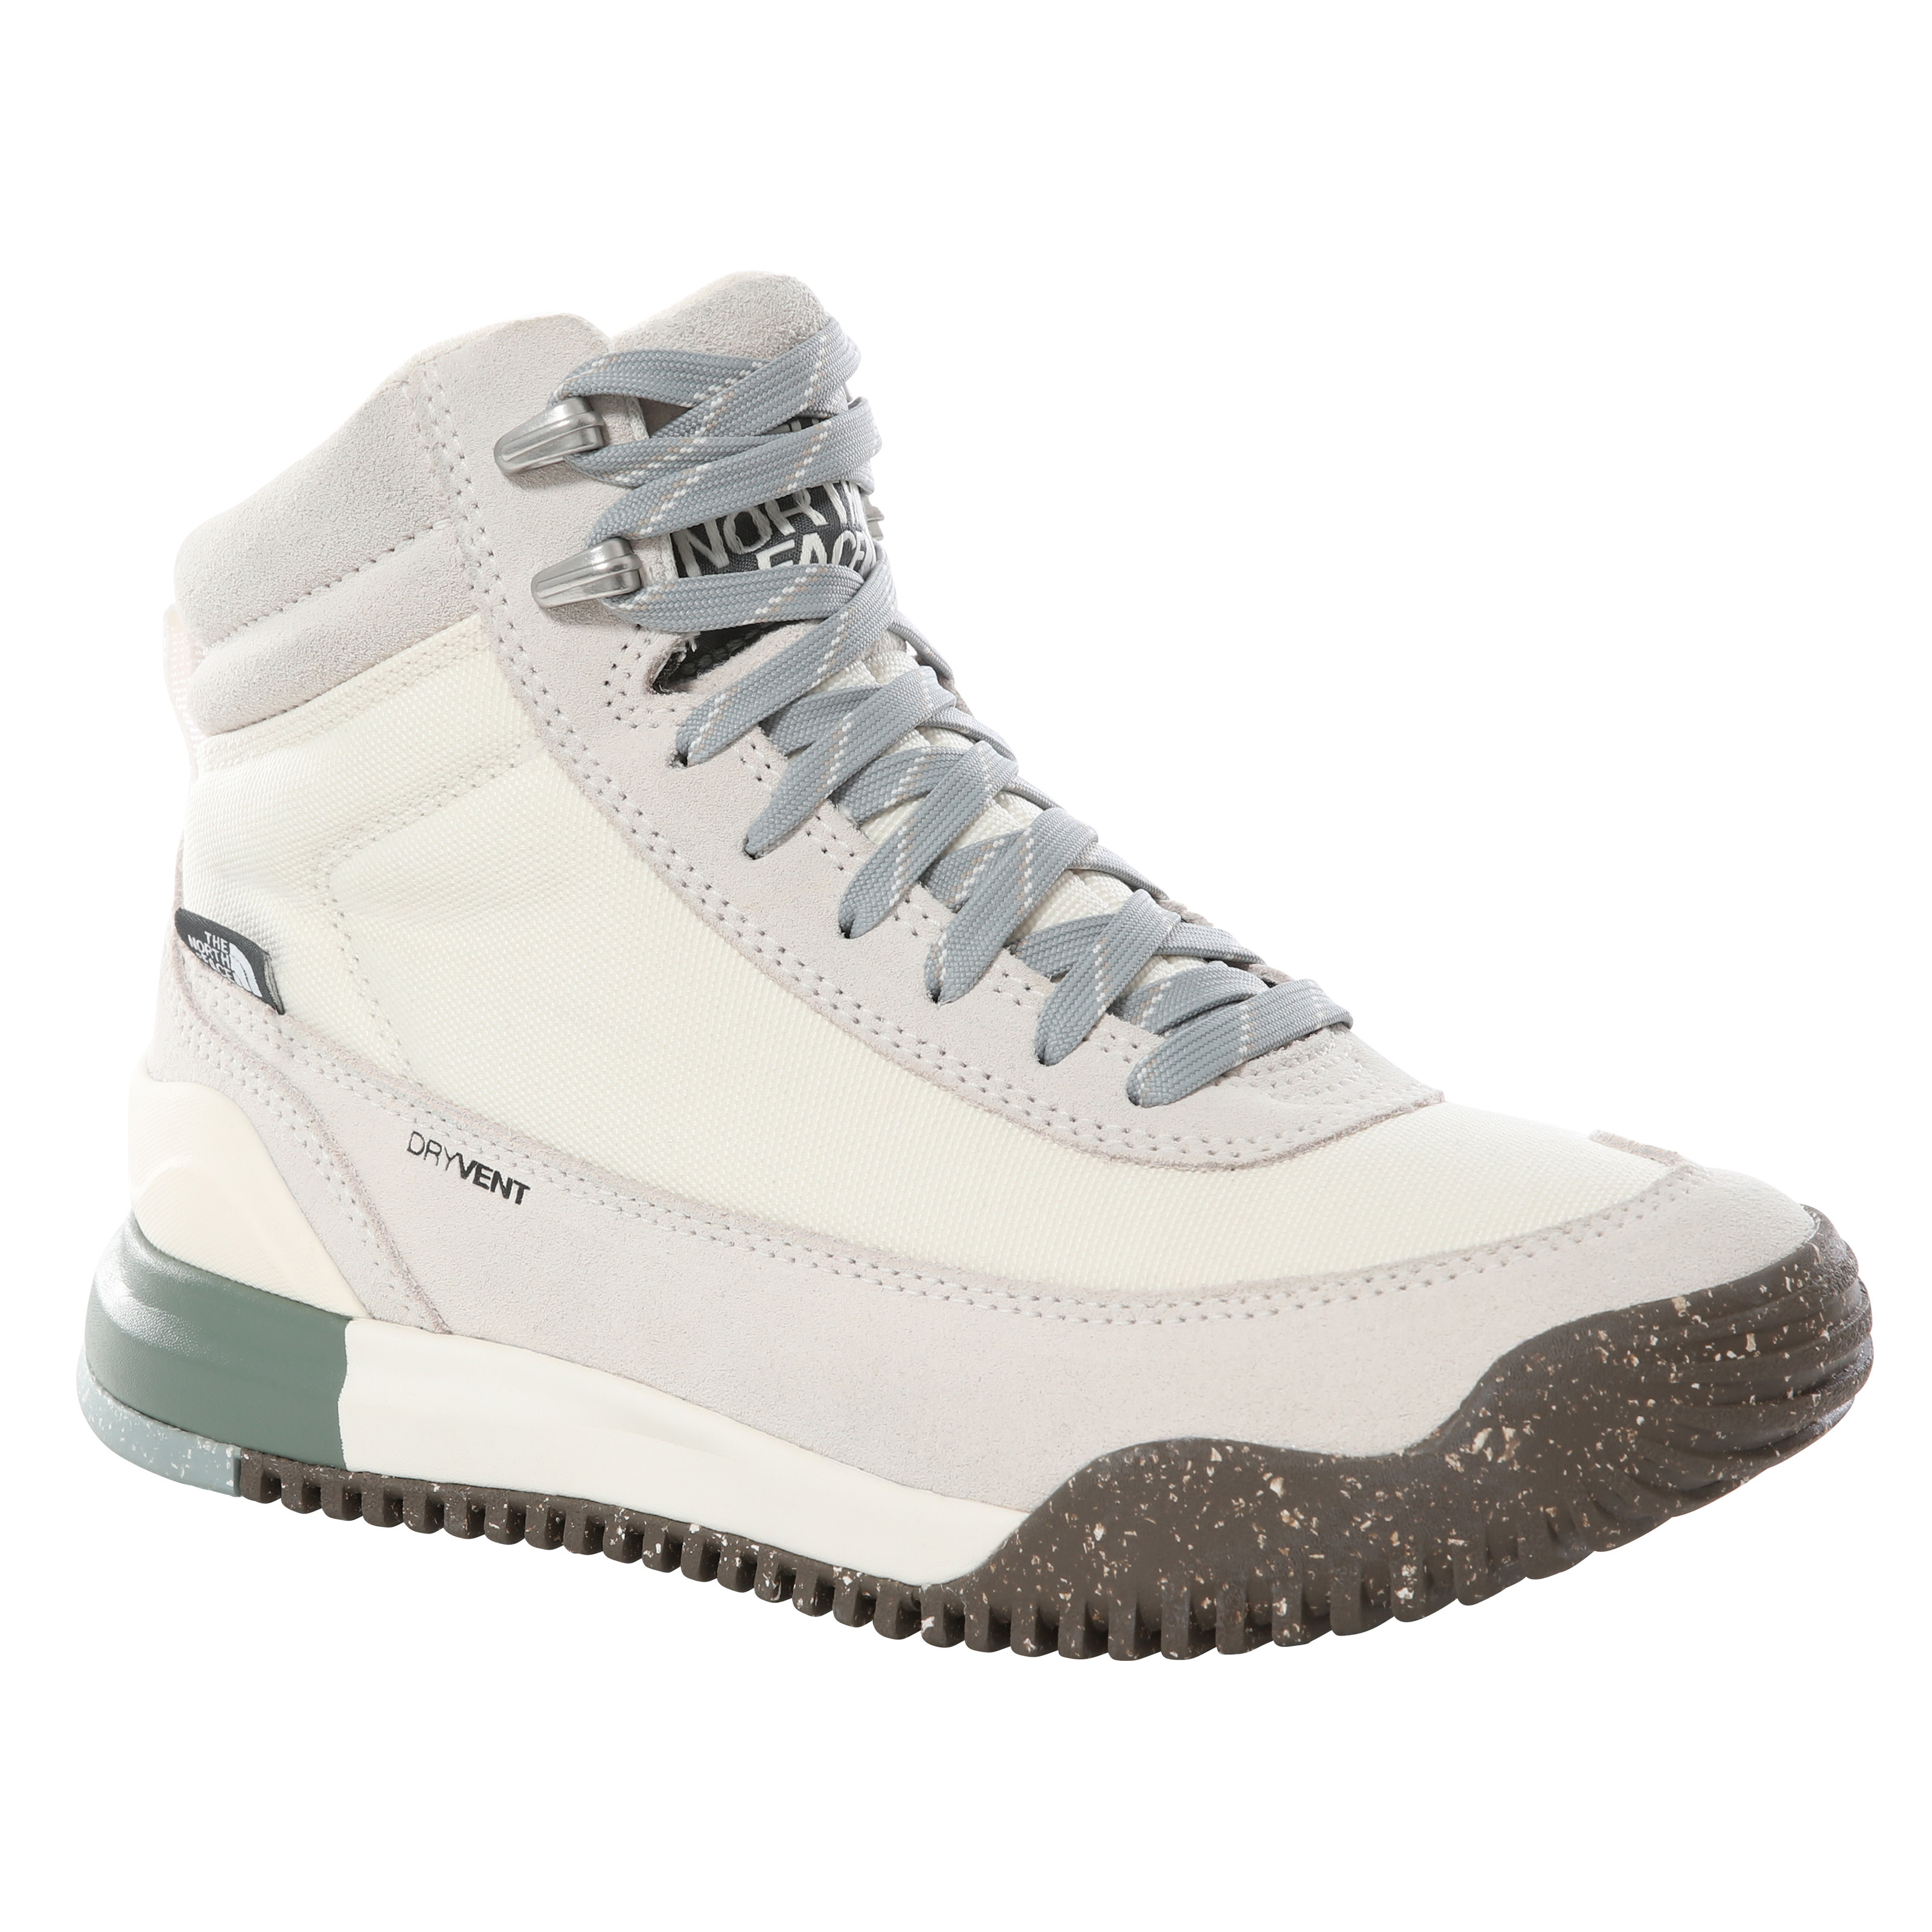 The North Face Women’s Back-To-Berkeley III Textile Waterproof Gardenia White/Silverblue